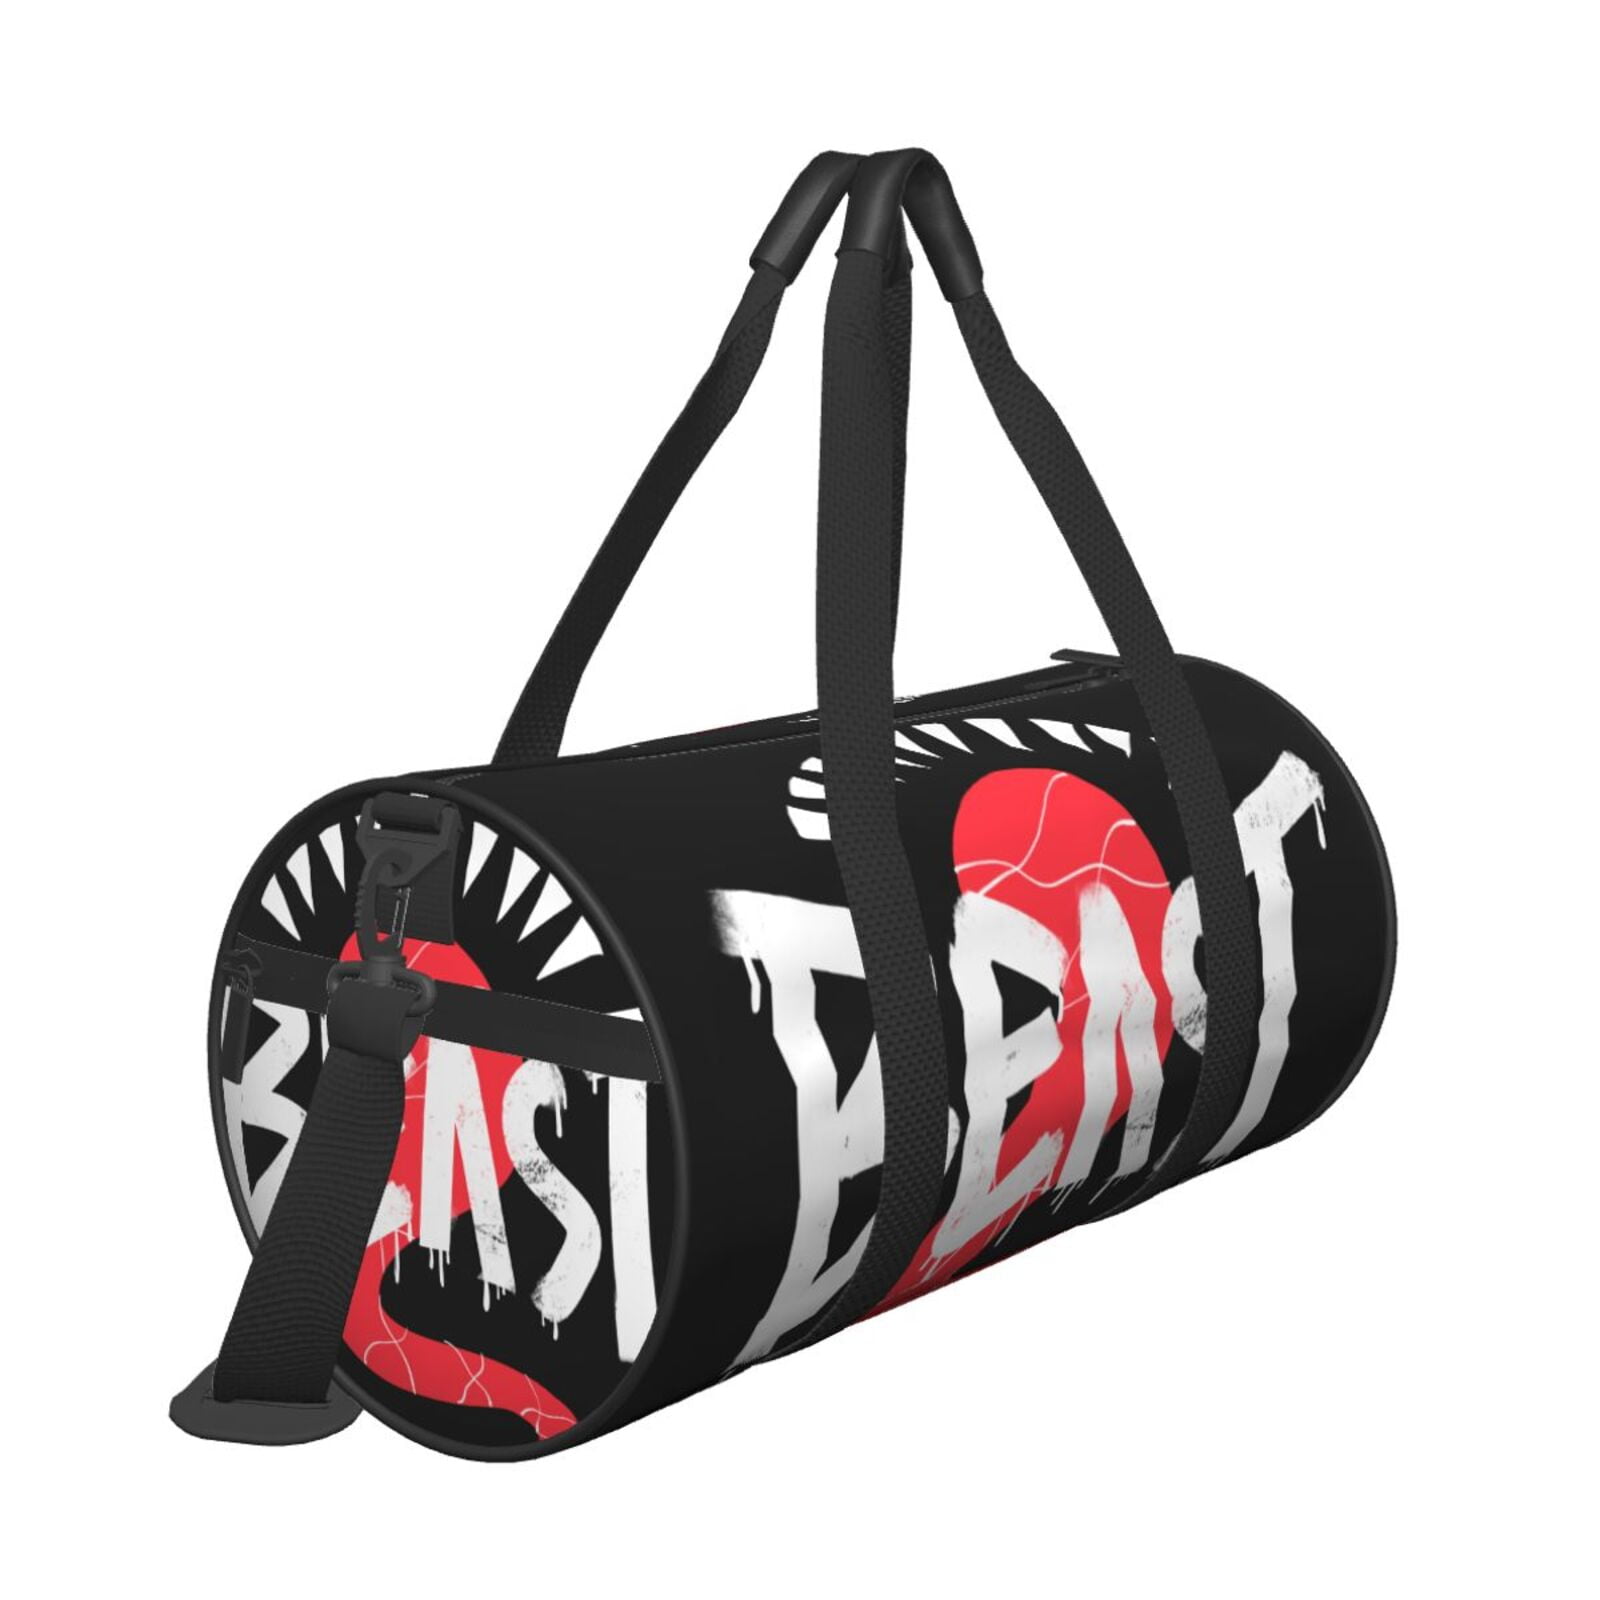 ZICANCN Love Kiss The Merger Unisex Large Duffle Bag for Travel